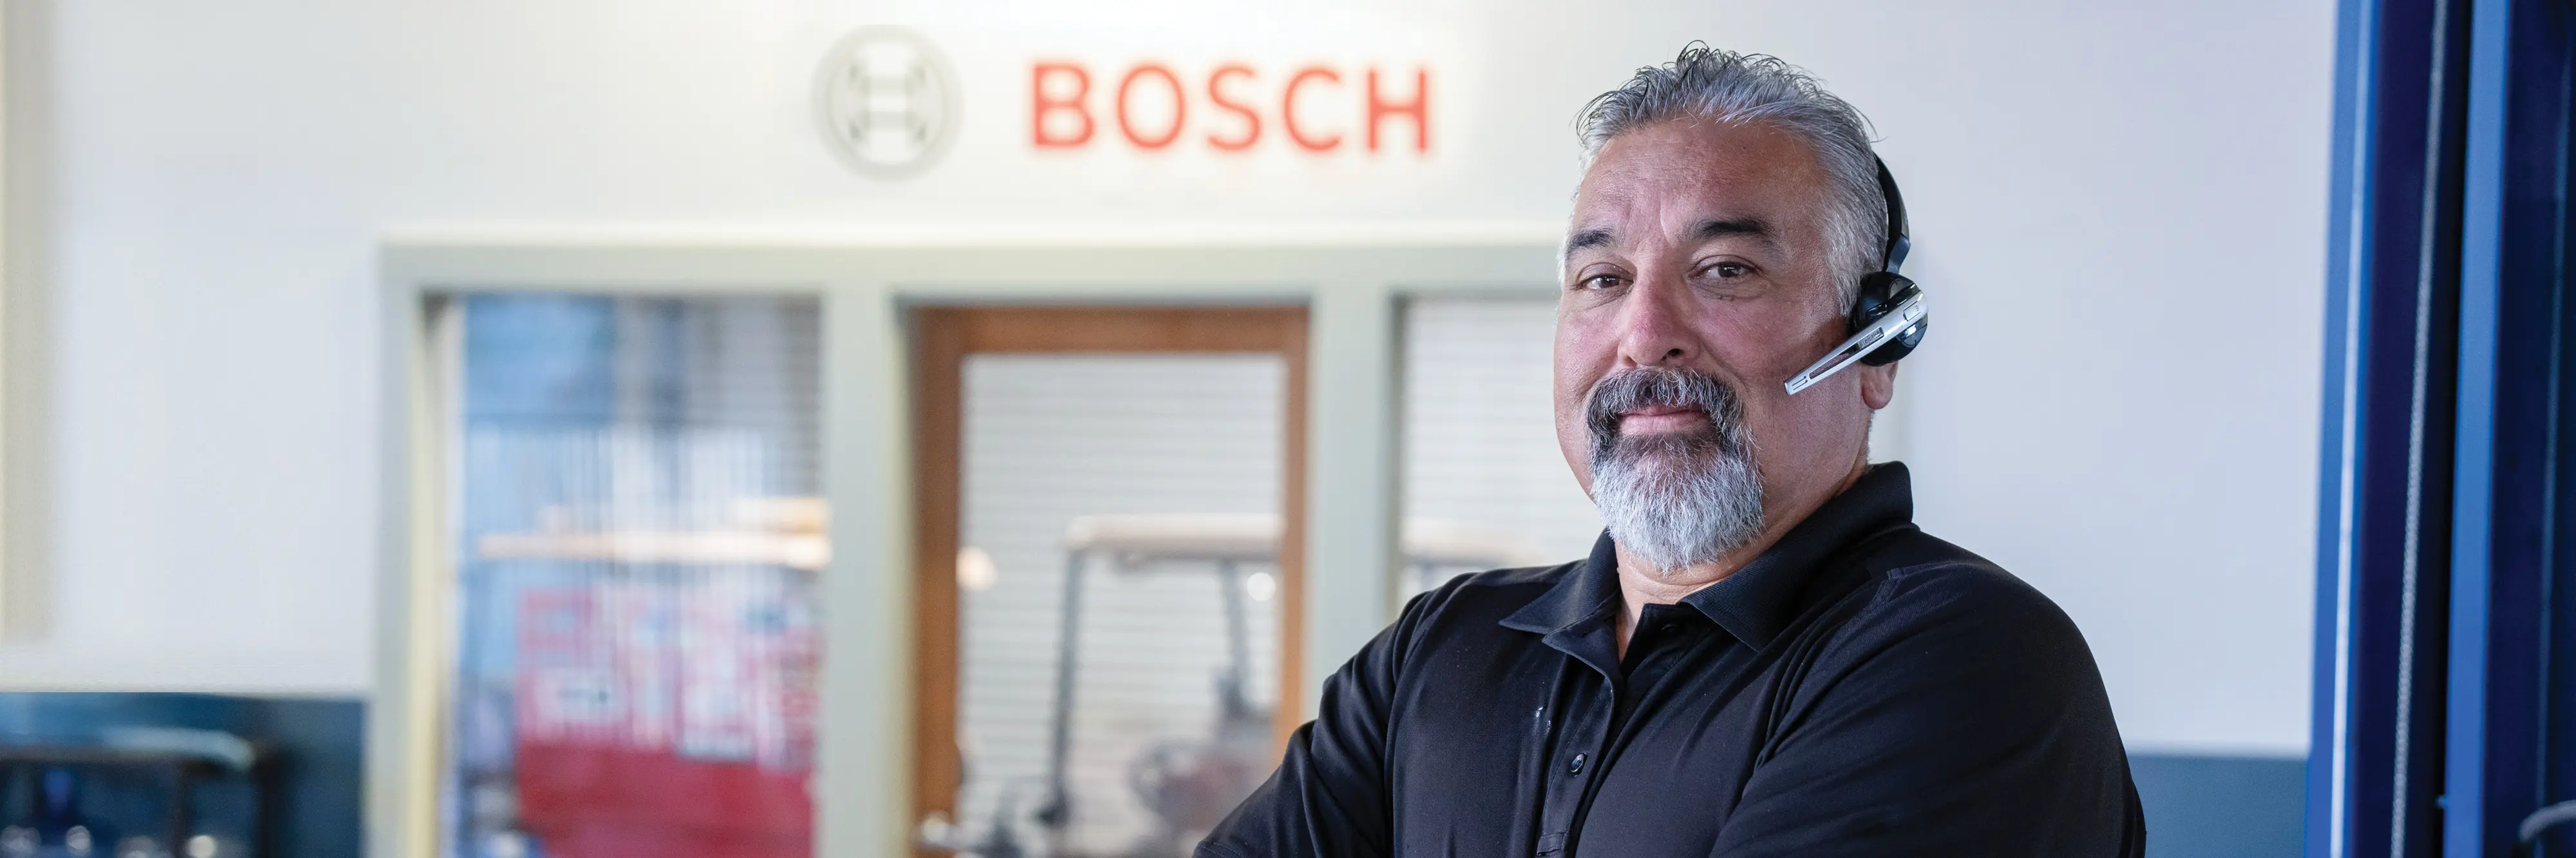 Bosch Auto Service gets your ready for life's adverntures